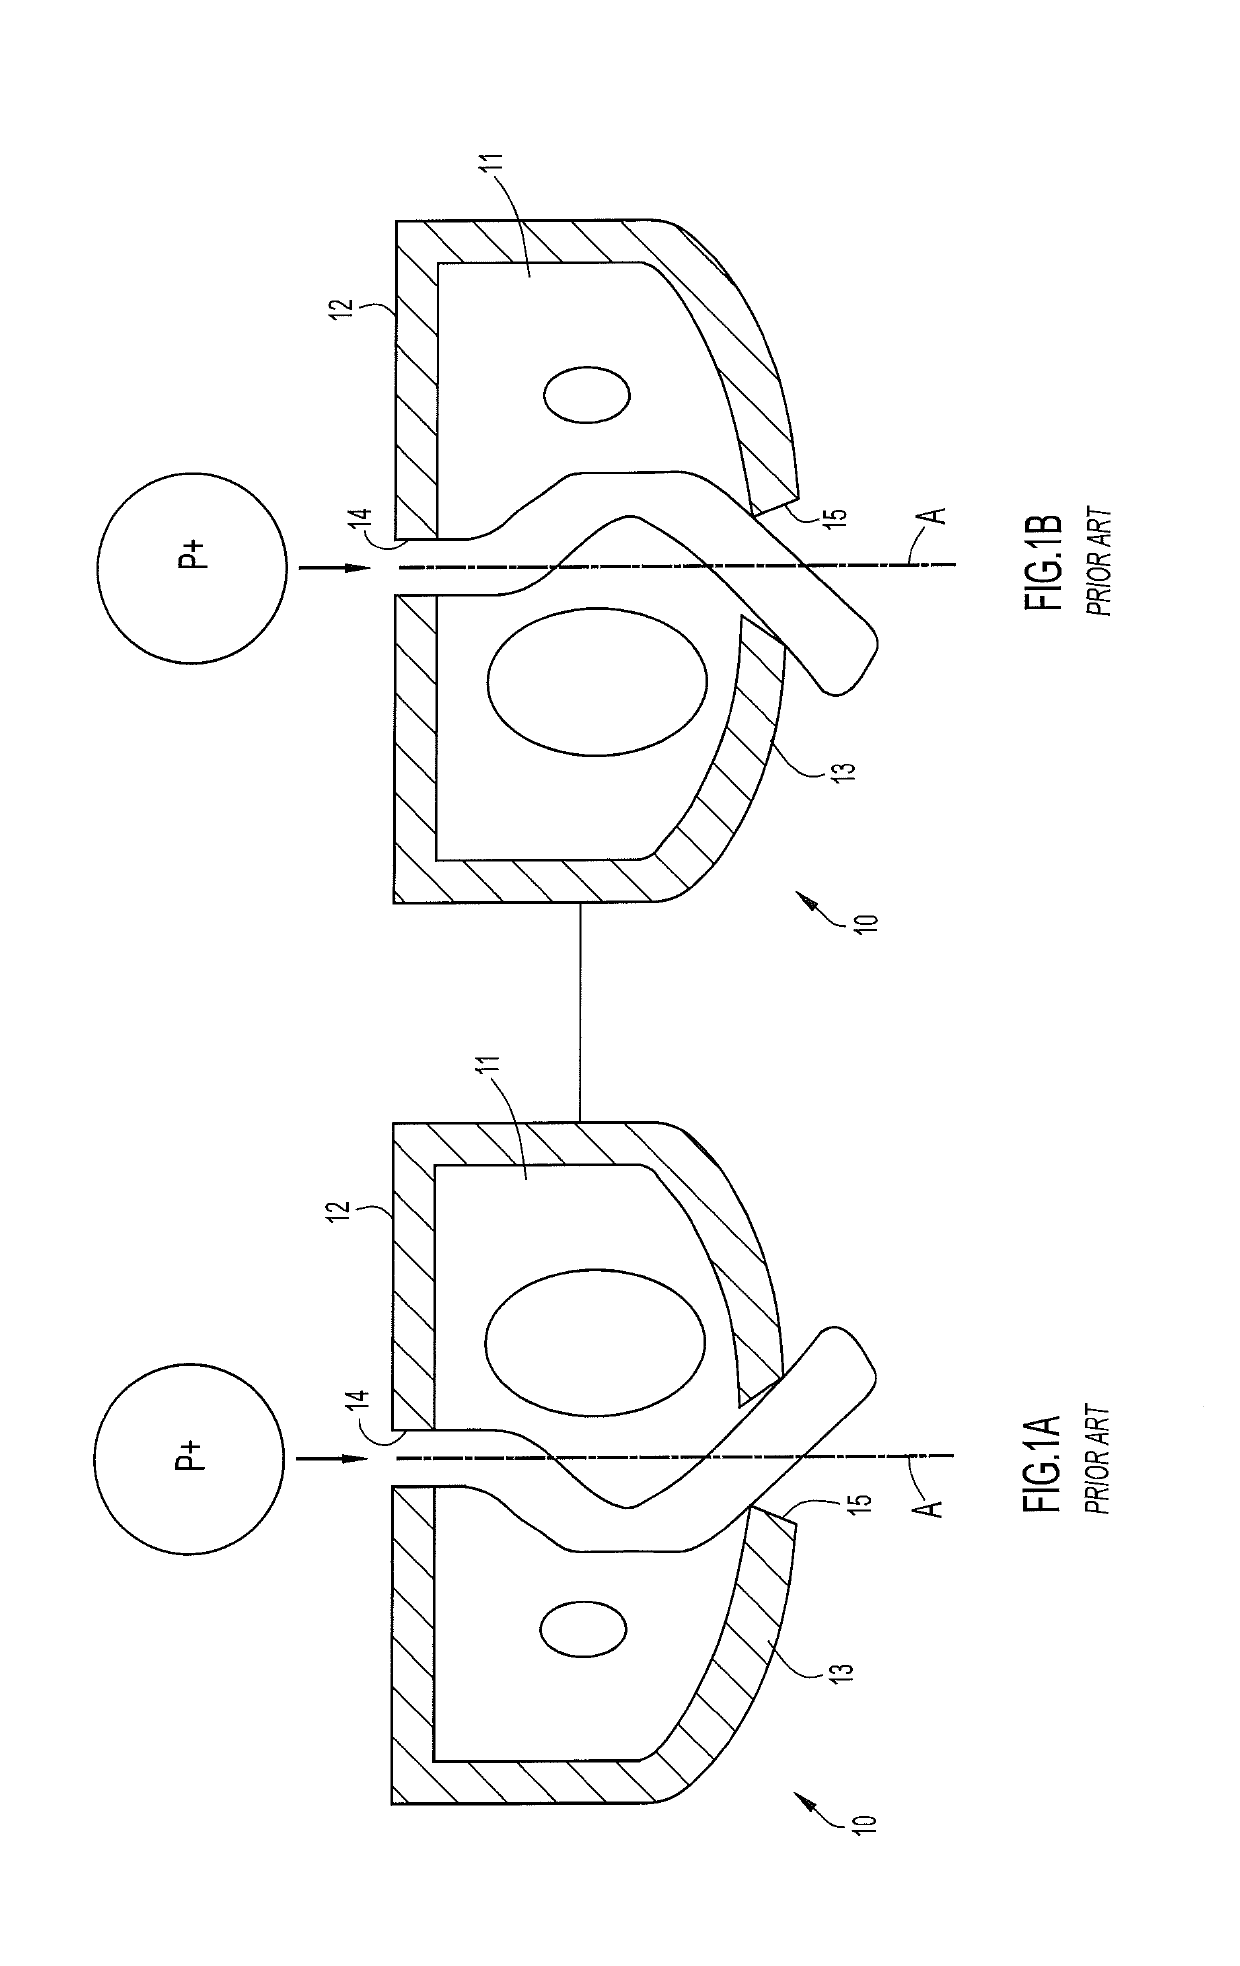 Fluidic scanner nozzle and spray unit employing same